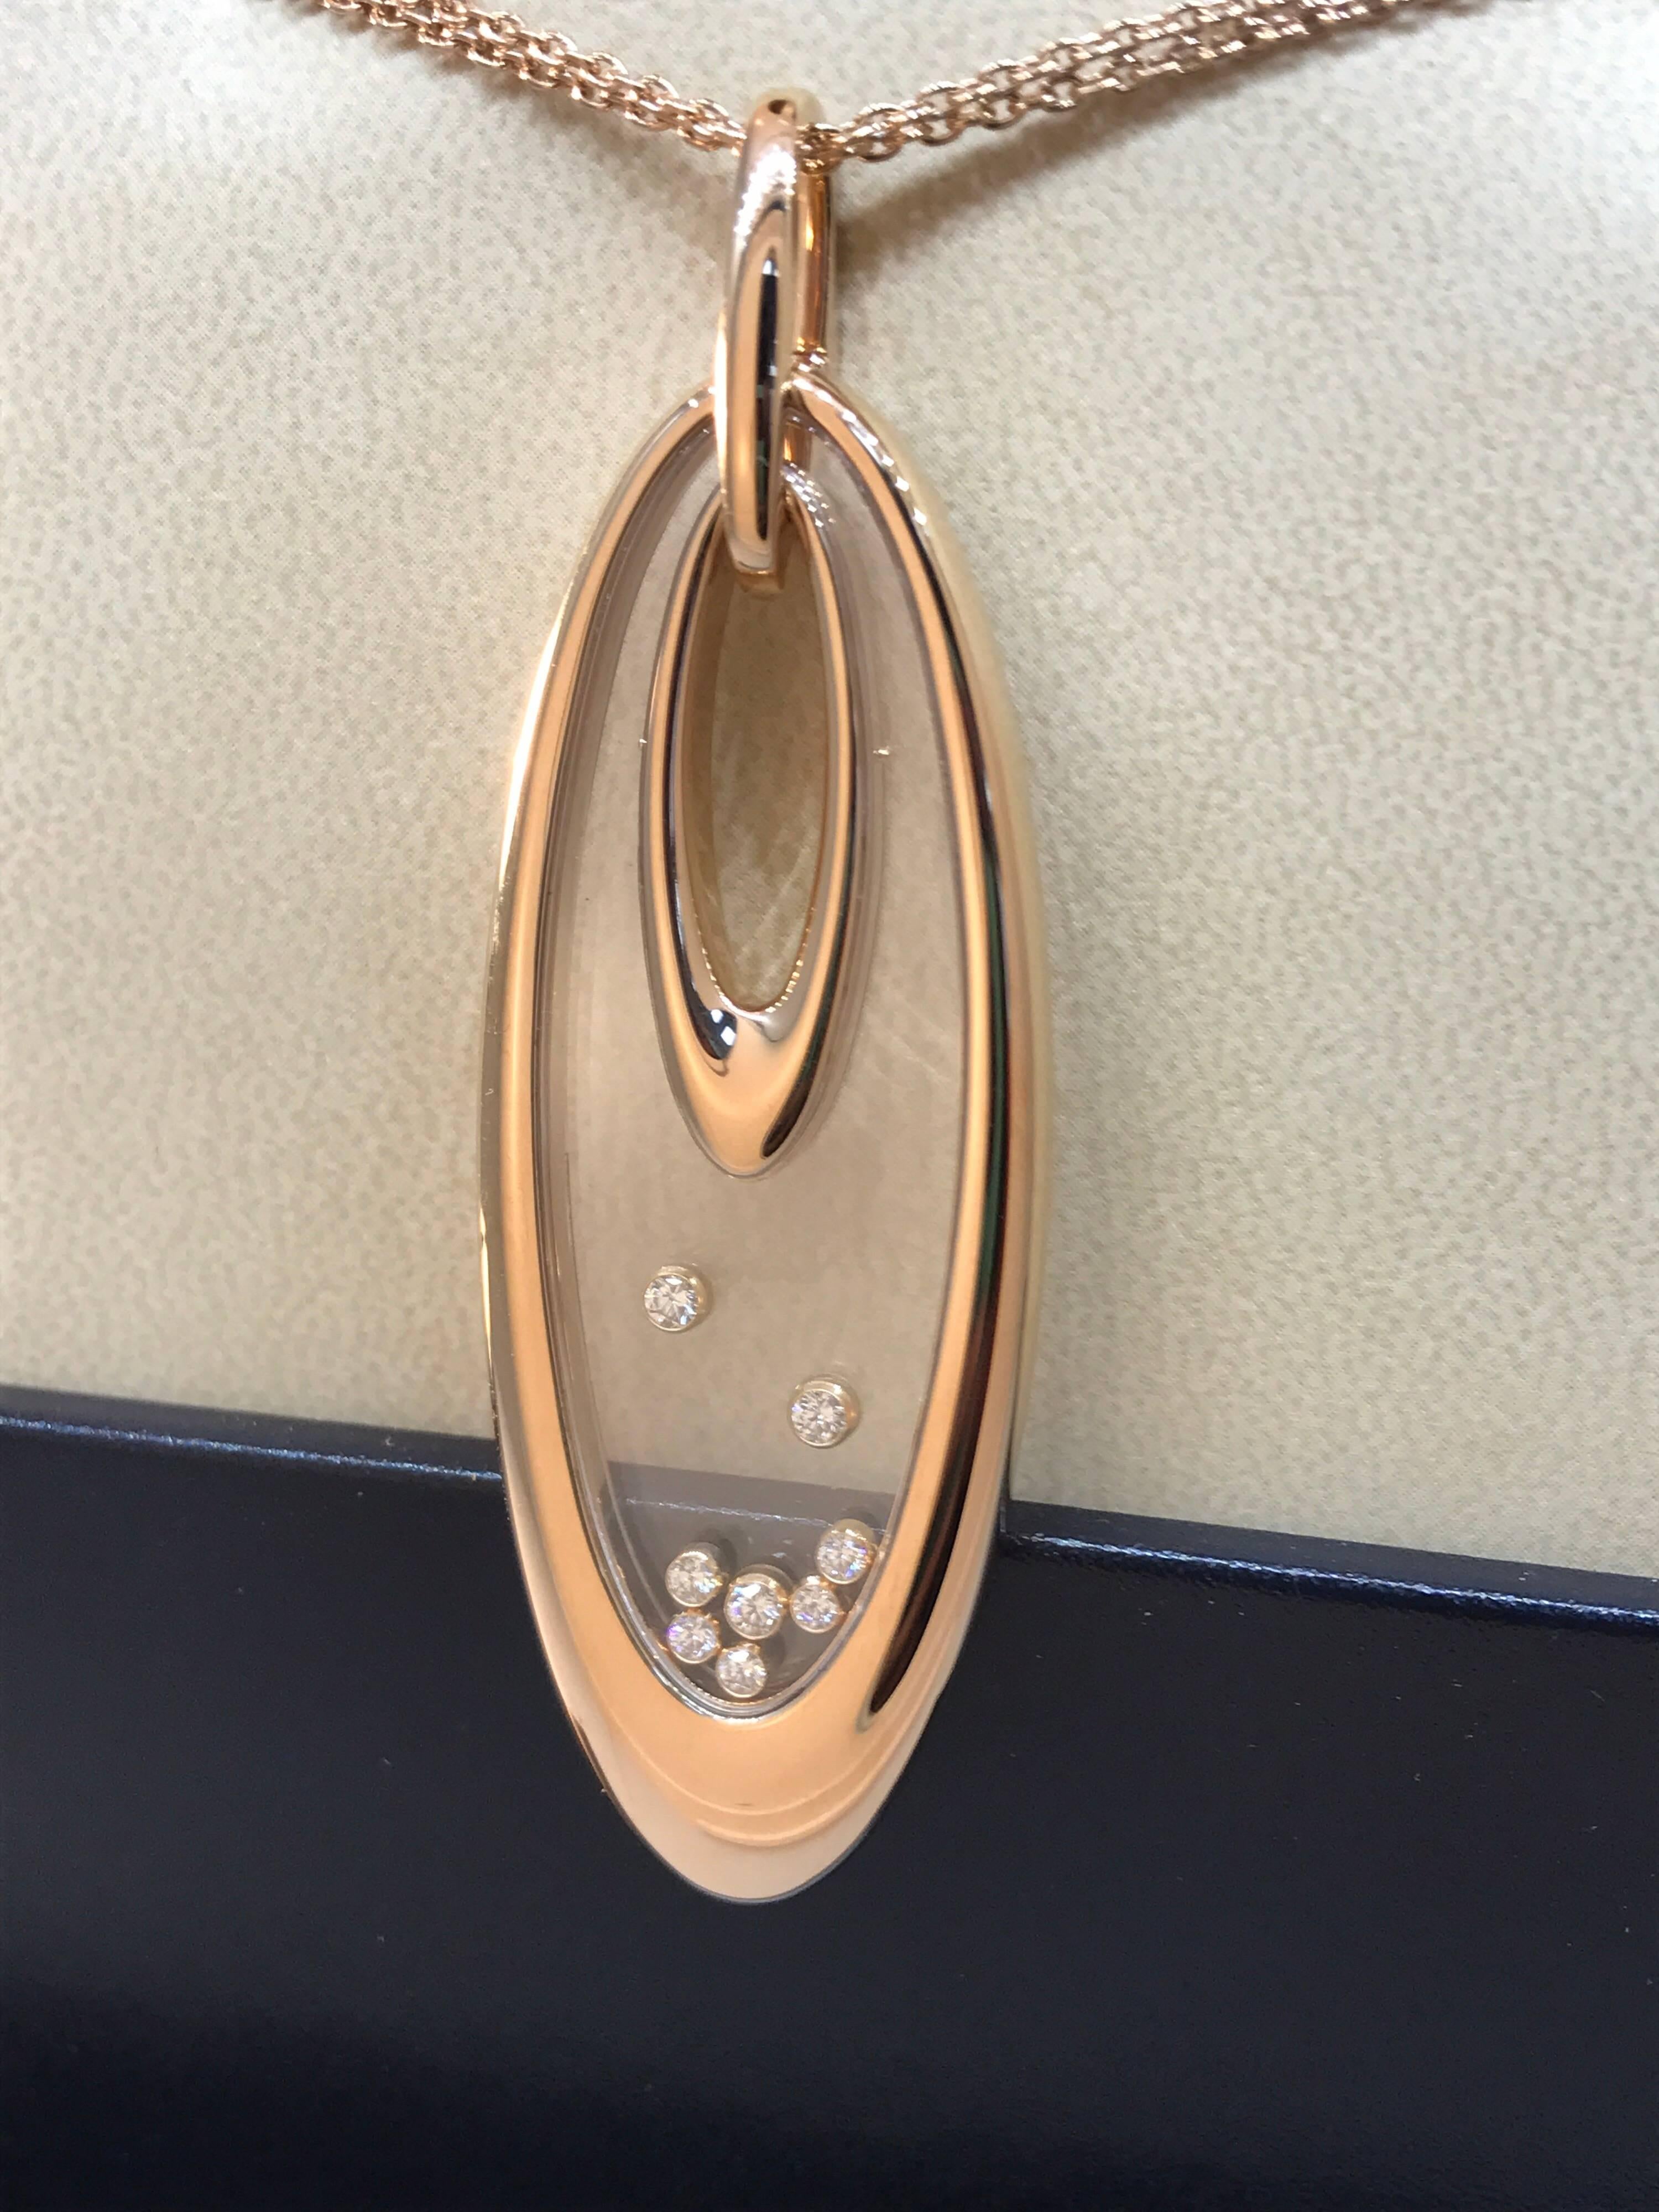 Chopard Happy Diamonds Large Oval Pendant / Necklace

Model Number: 79/7781-5001

100% Authentic

Brand New

Comes with original Chopard box, certificate of authenticity and warranty, and jewels manual

18 Karat Rose Gold (54.8gr)

3 Floating